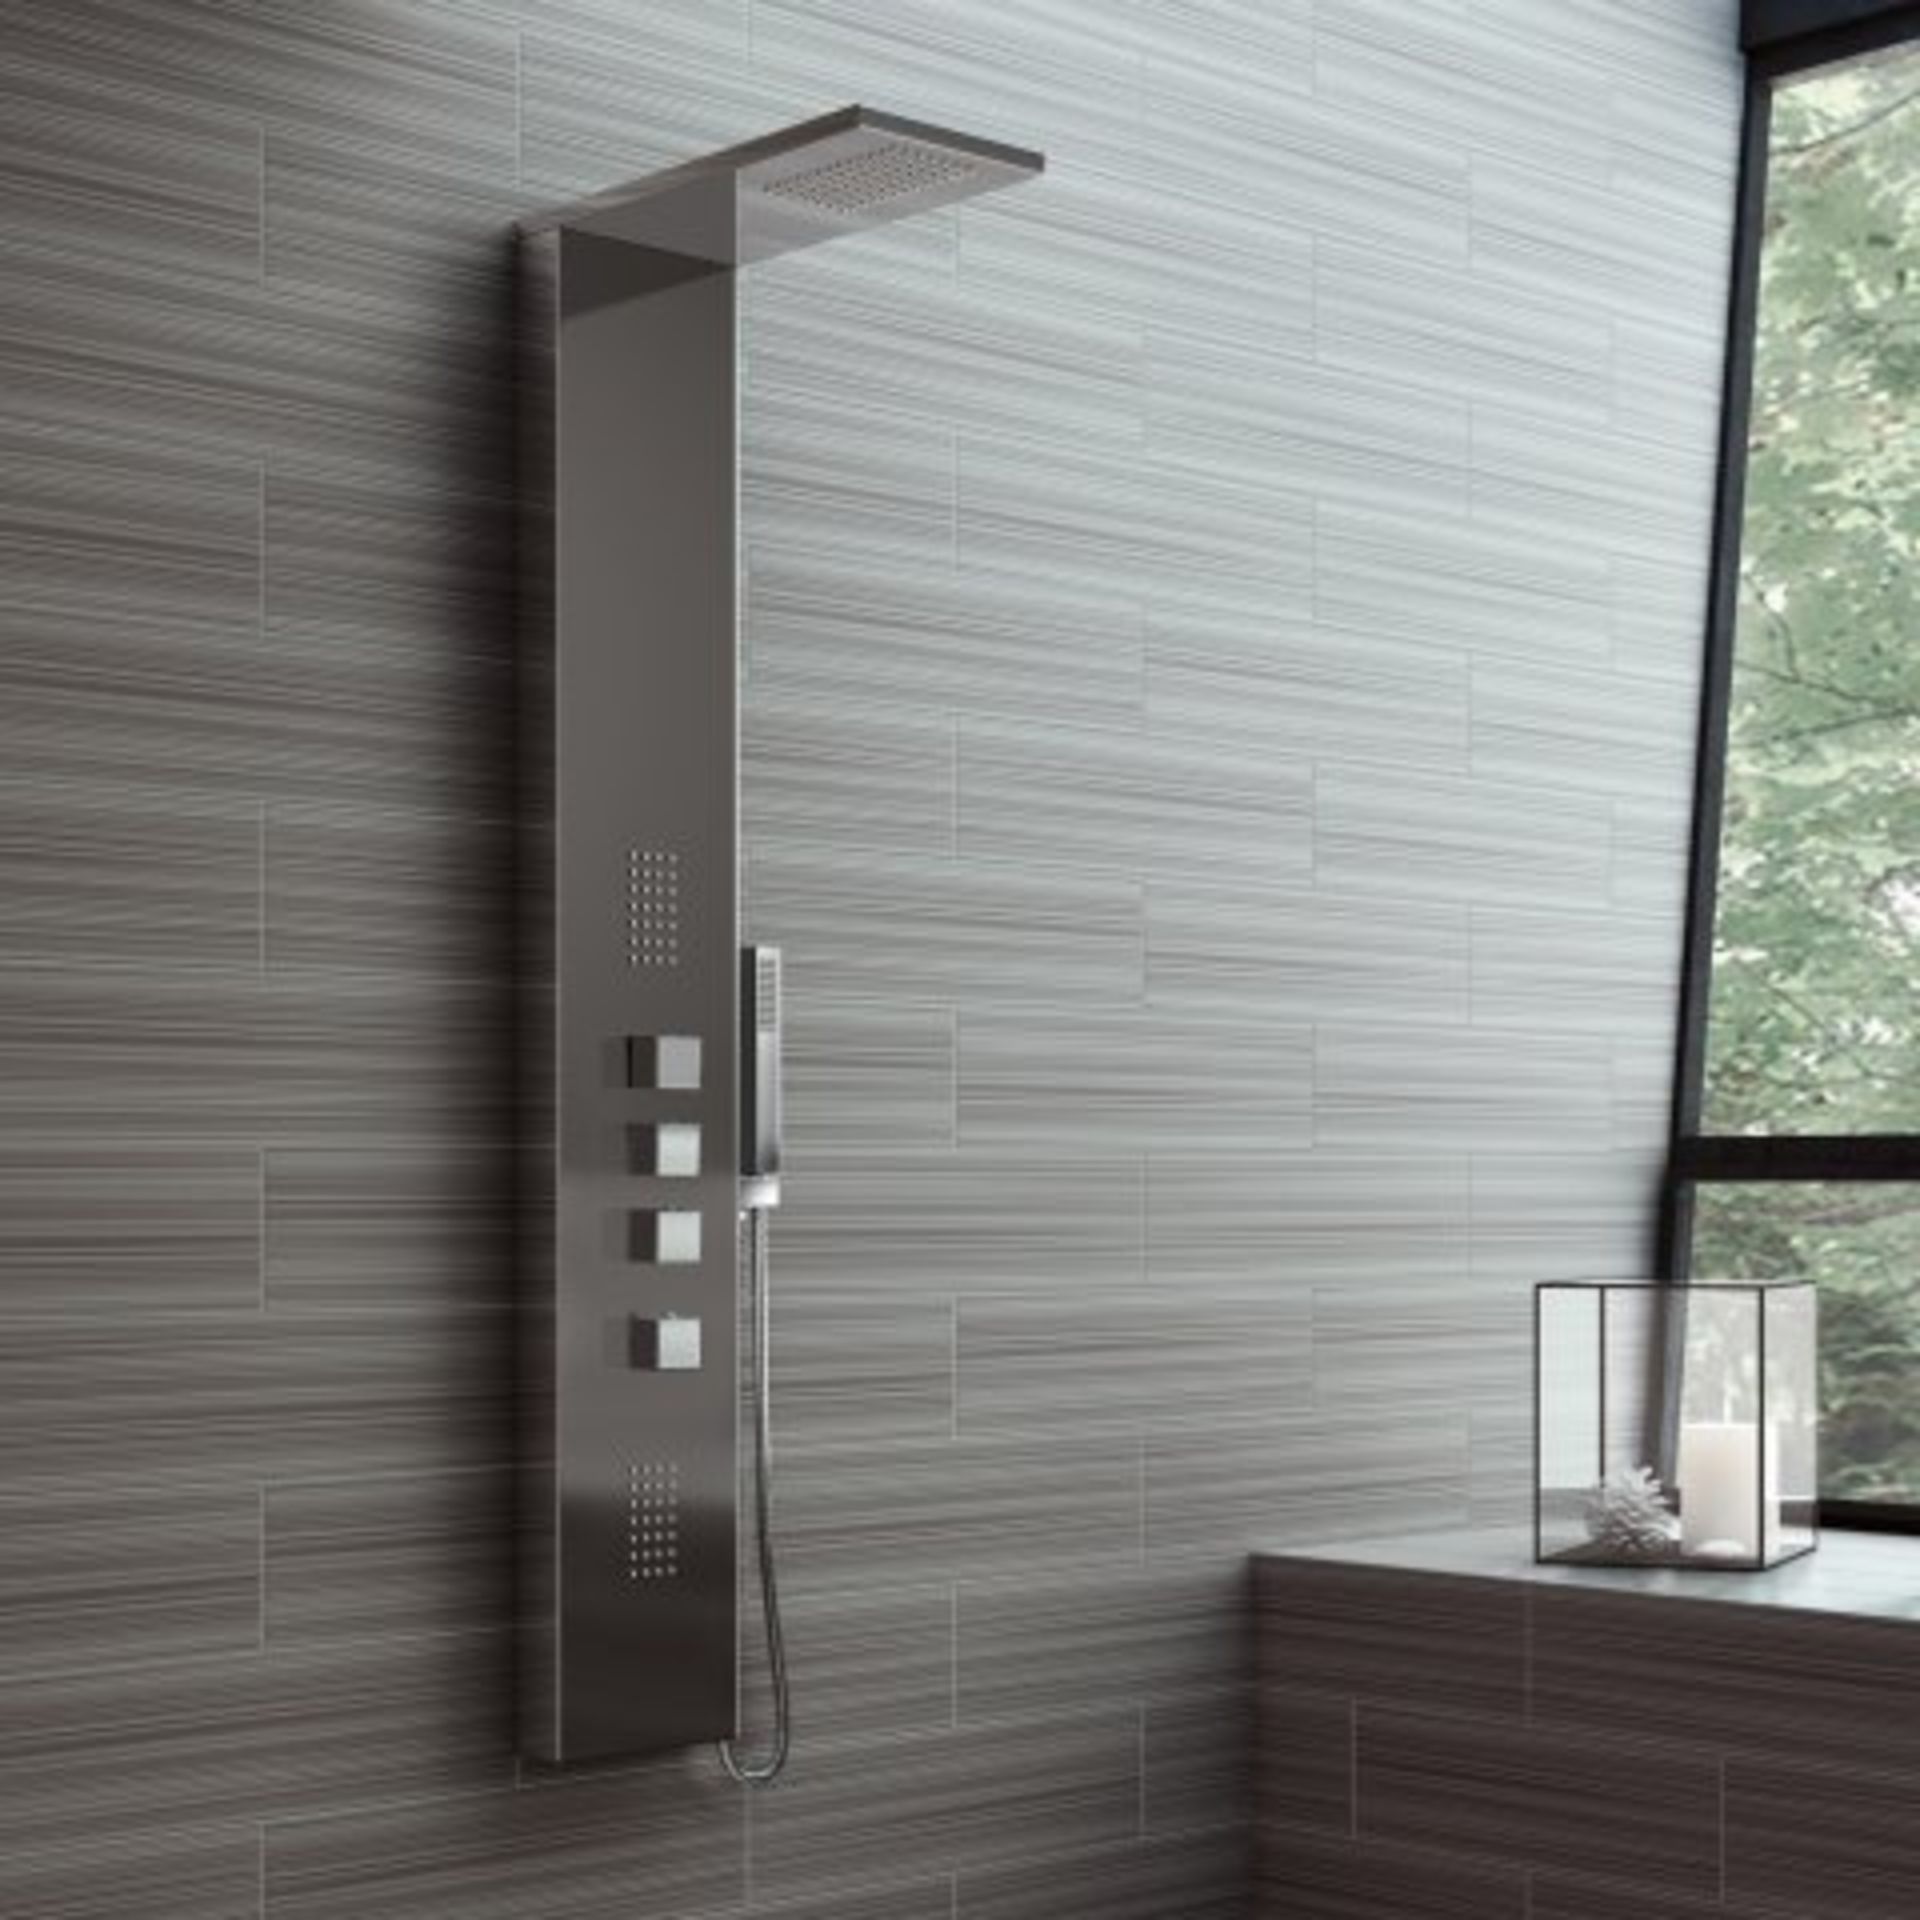 (AA10) Black Shower Panel Tower & Luxury Body Jets. RRP £599.99. Feel inspired with our premium